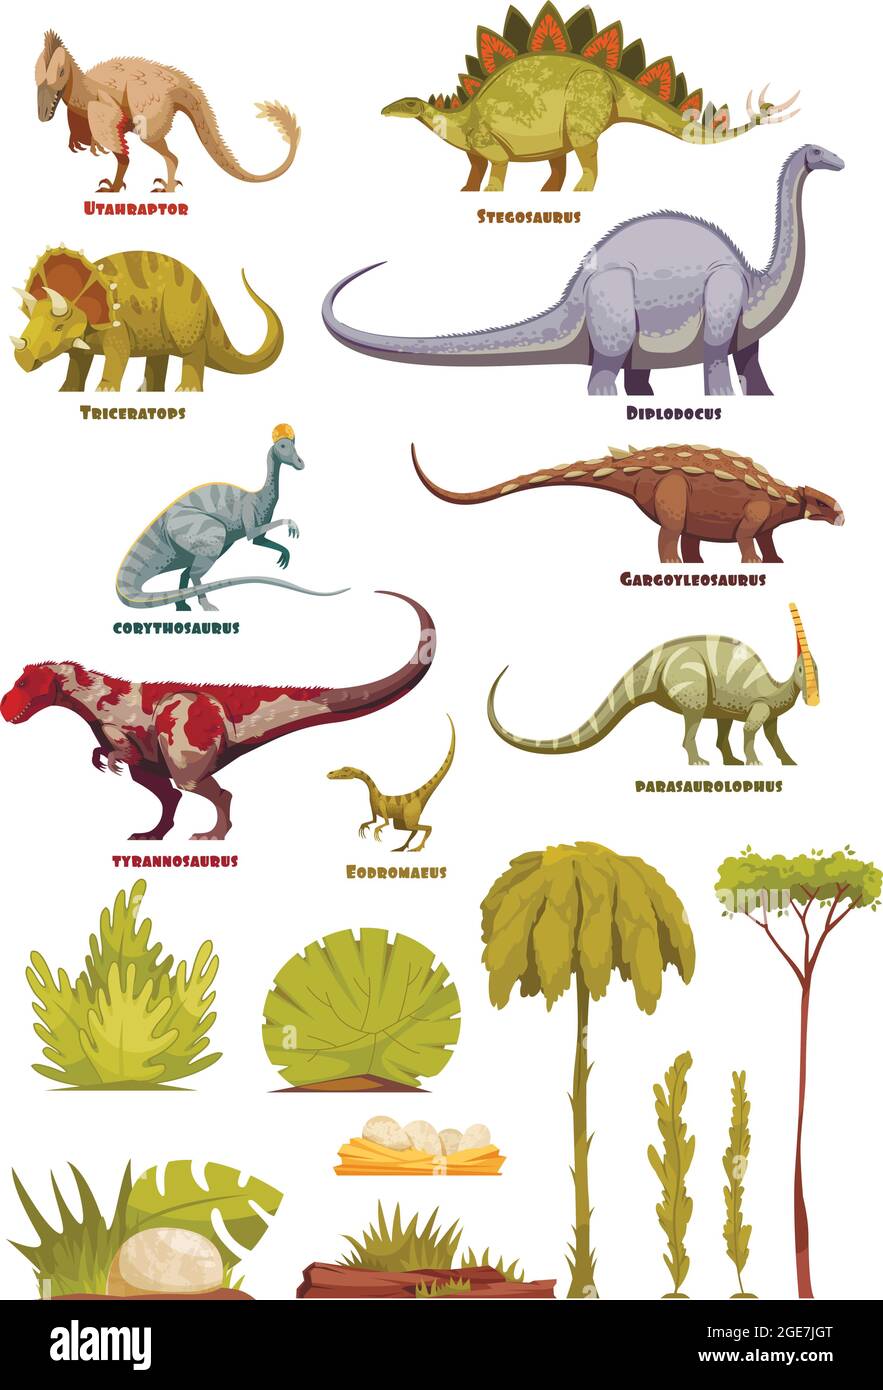 different-types-of-dinosaurs-in-cartoon-style-with-name-of-class-and